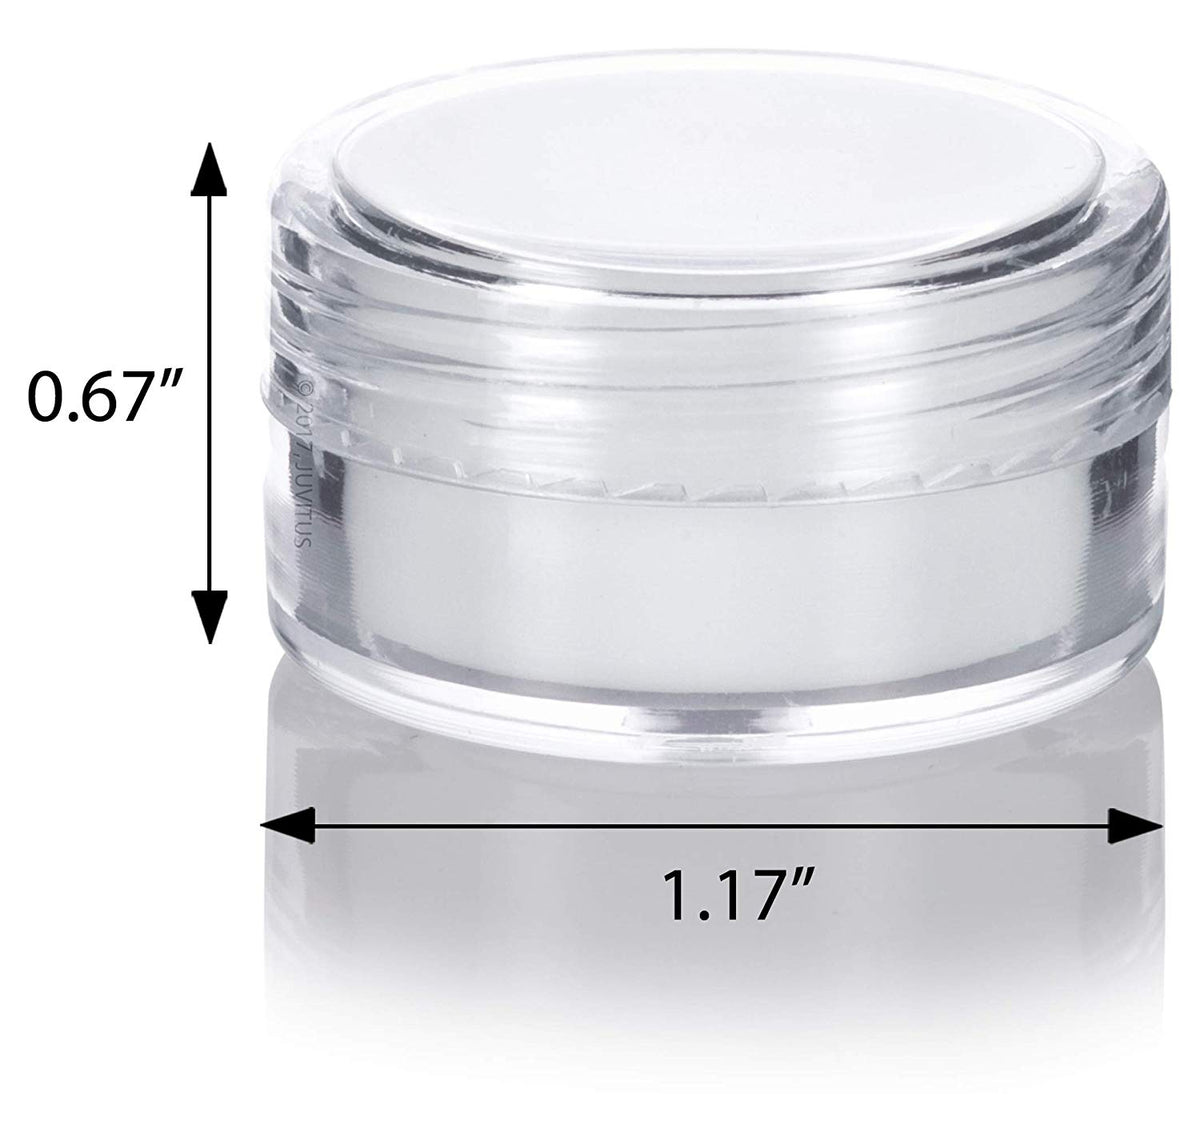 2oz, 3oz, 6oz, 8oz Clear Containers With White Screw on Lids. 